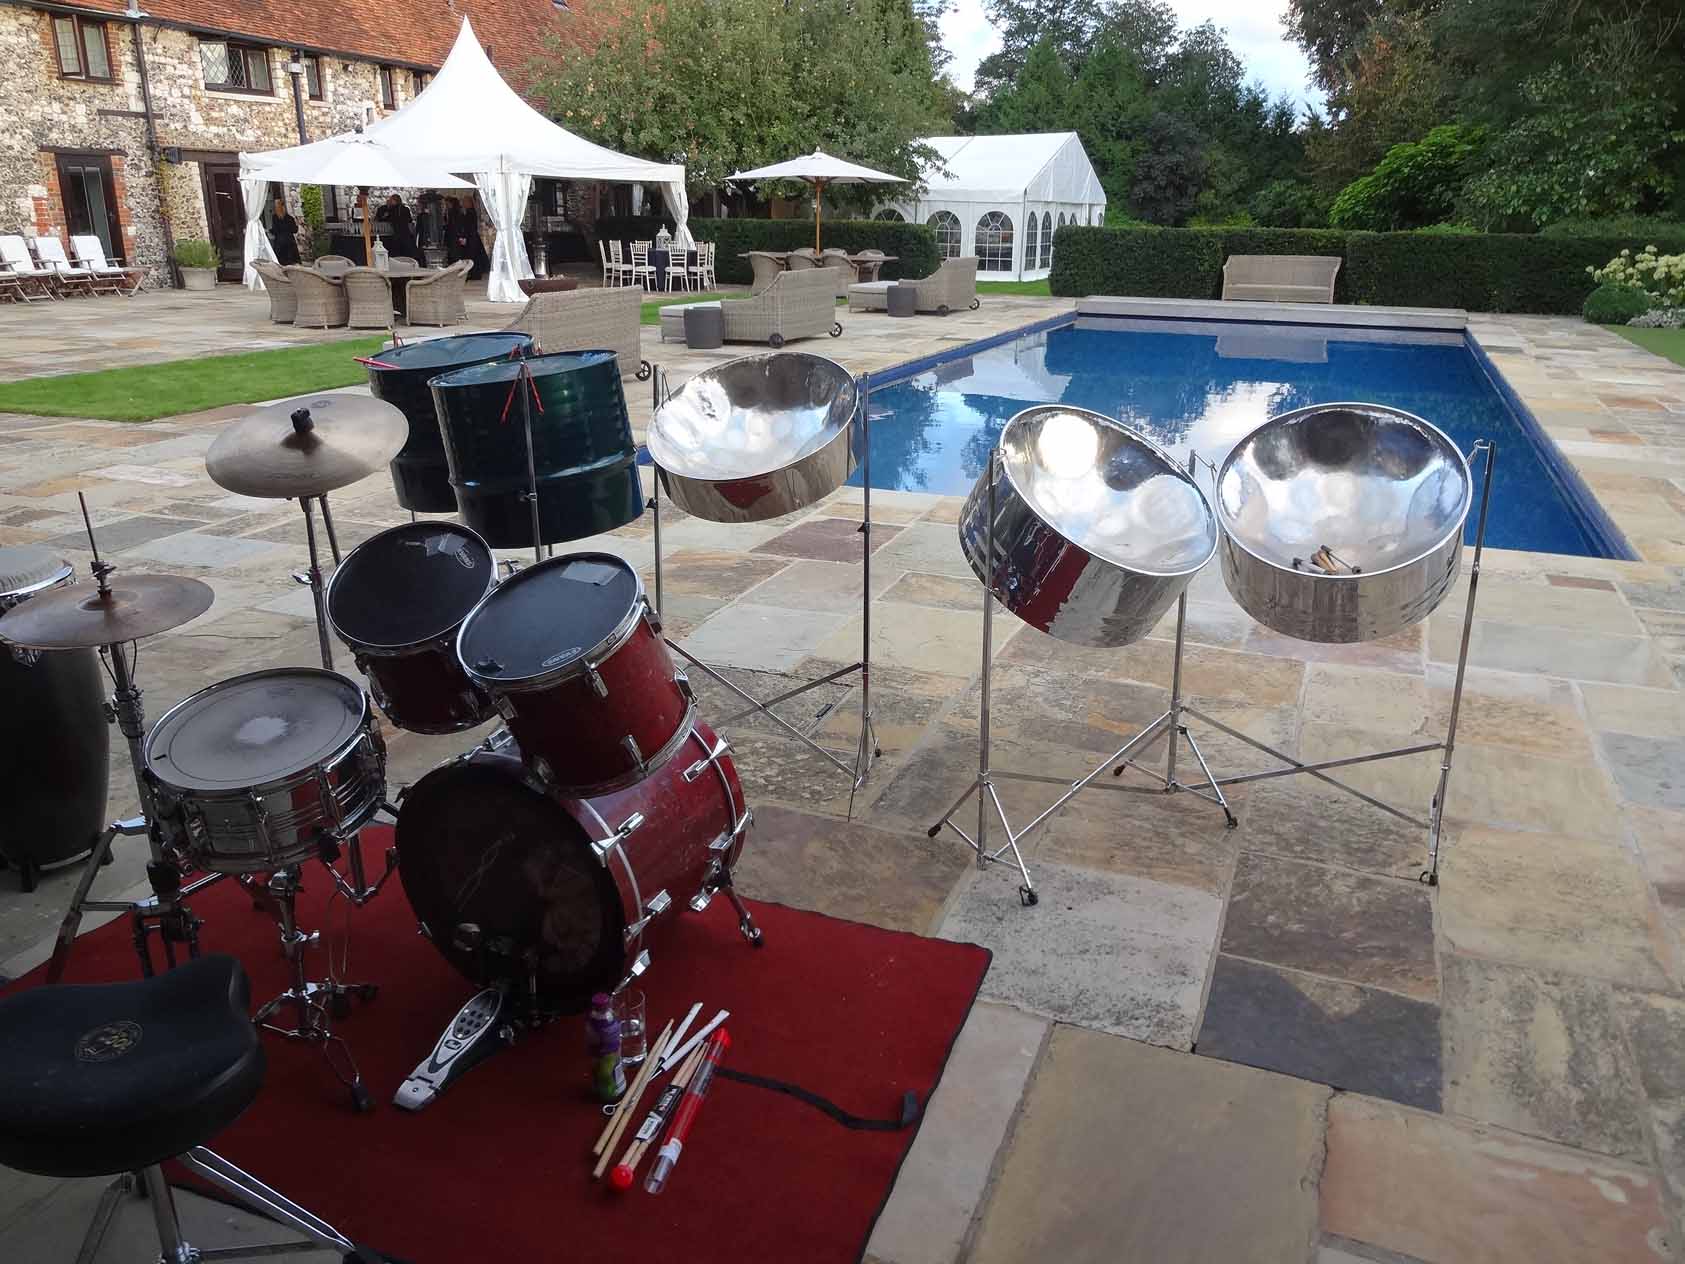 Five-piece Caribbean steel drum band set up beside a swimming pool at an exquisite summer party, providing lively entertainment and a festive atmosphere.